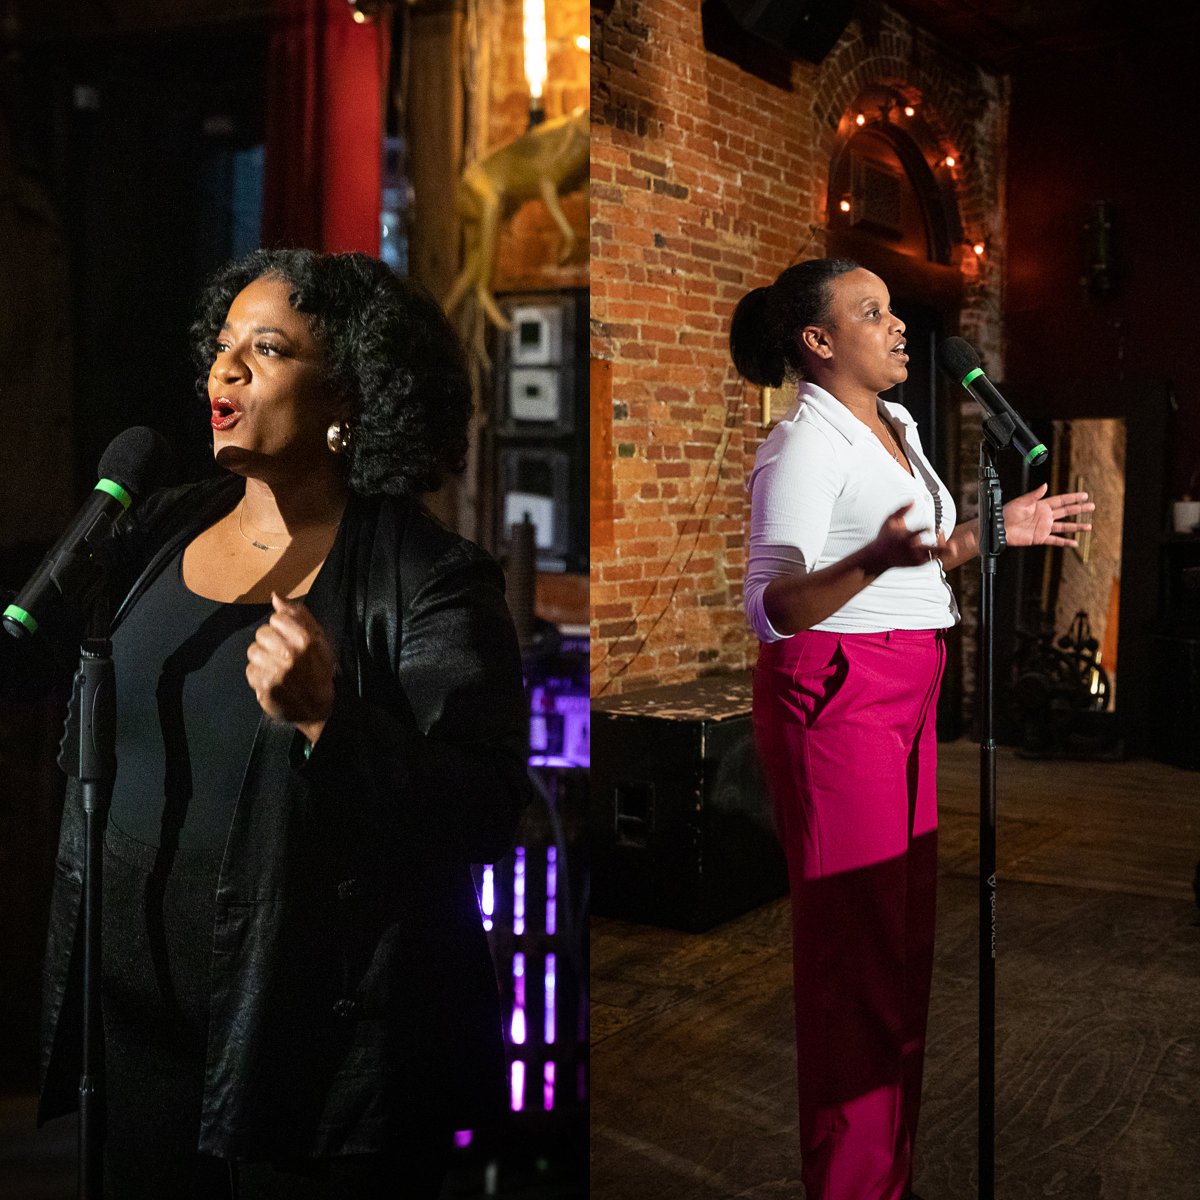 Big Night for MISSION Story Slam 9: Movin' Right Along at @natmechanics Great stories and a nearly-sold-out crowd. @TrenaeNuri of @citycastphilly won the Judges Award for her story and @ZakyaRenee of @CLSphila won her second Crowd Favorite Prize sponsored by @yptcllc